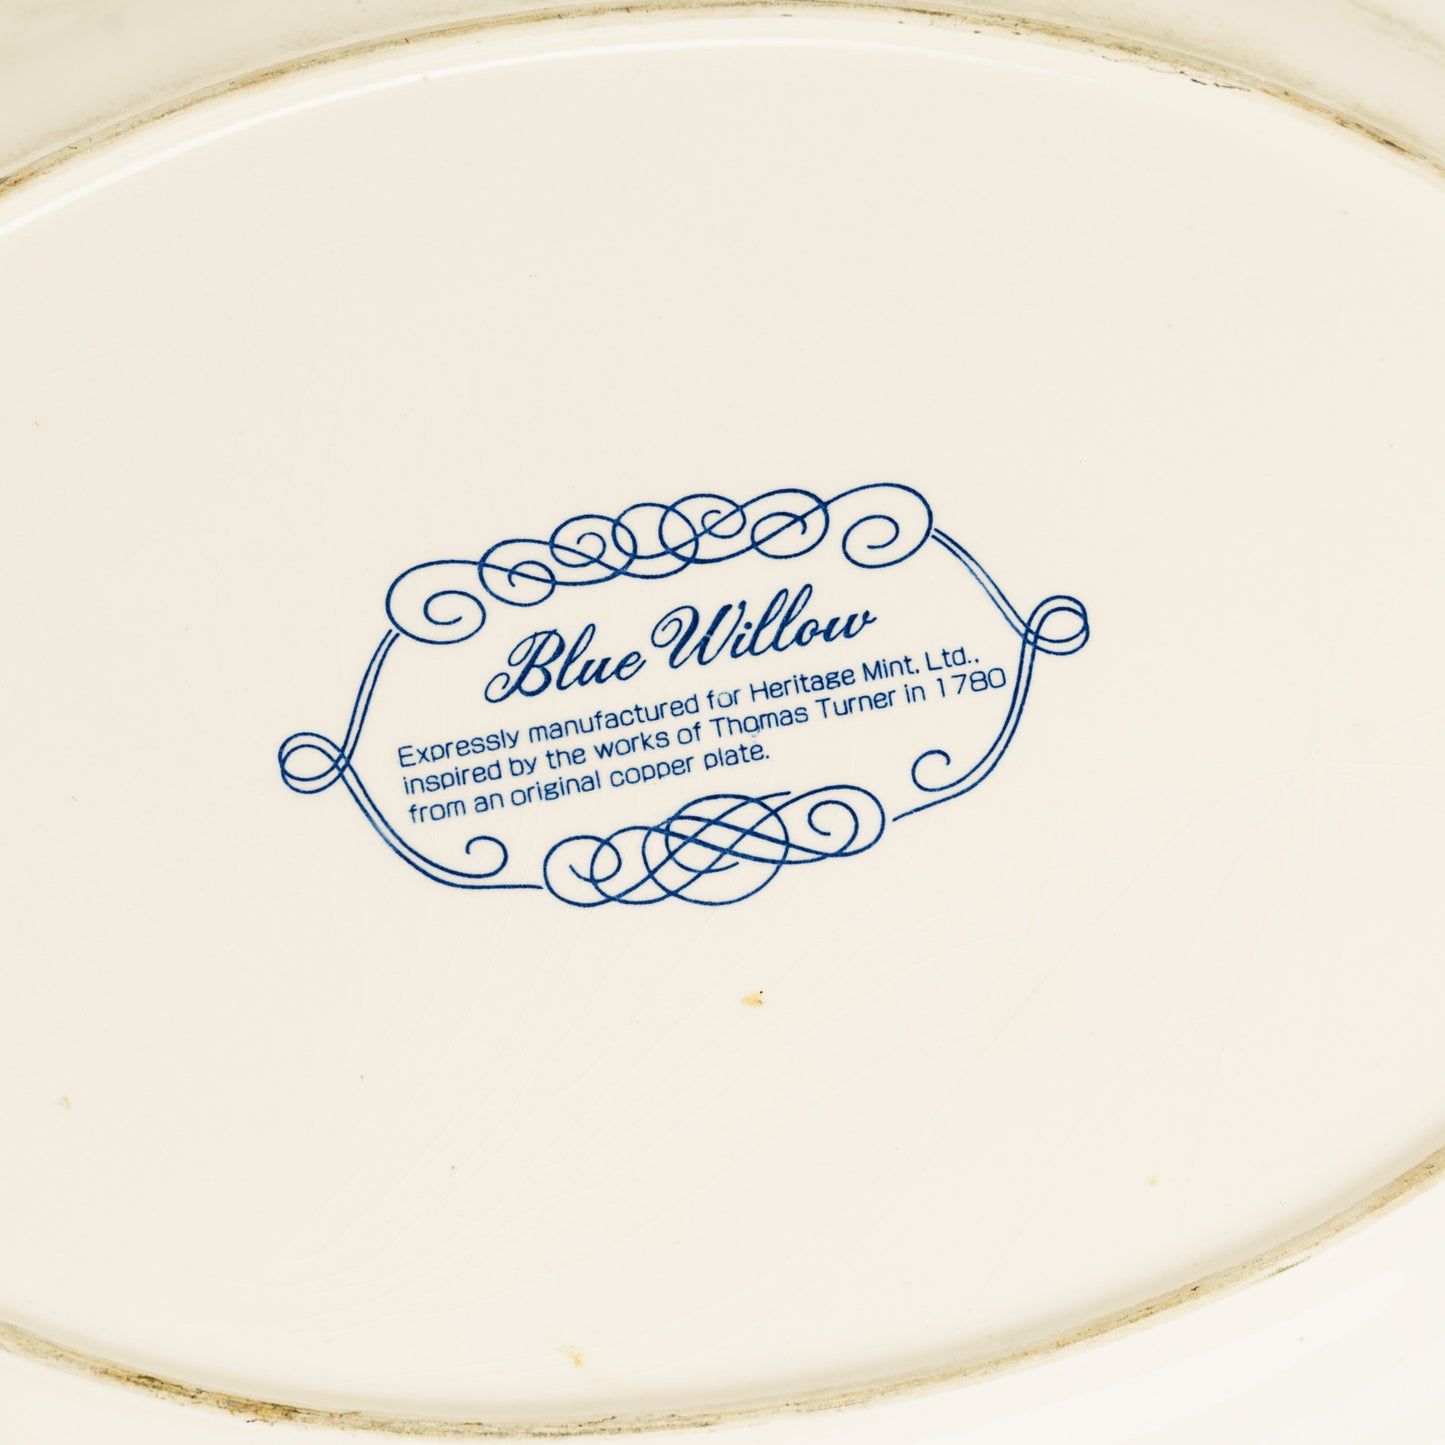 Large Blue Willow Platter